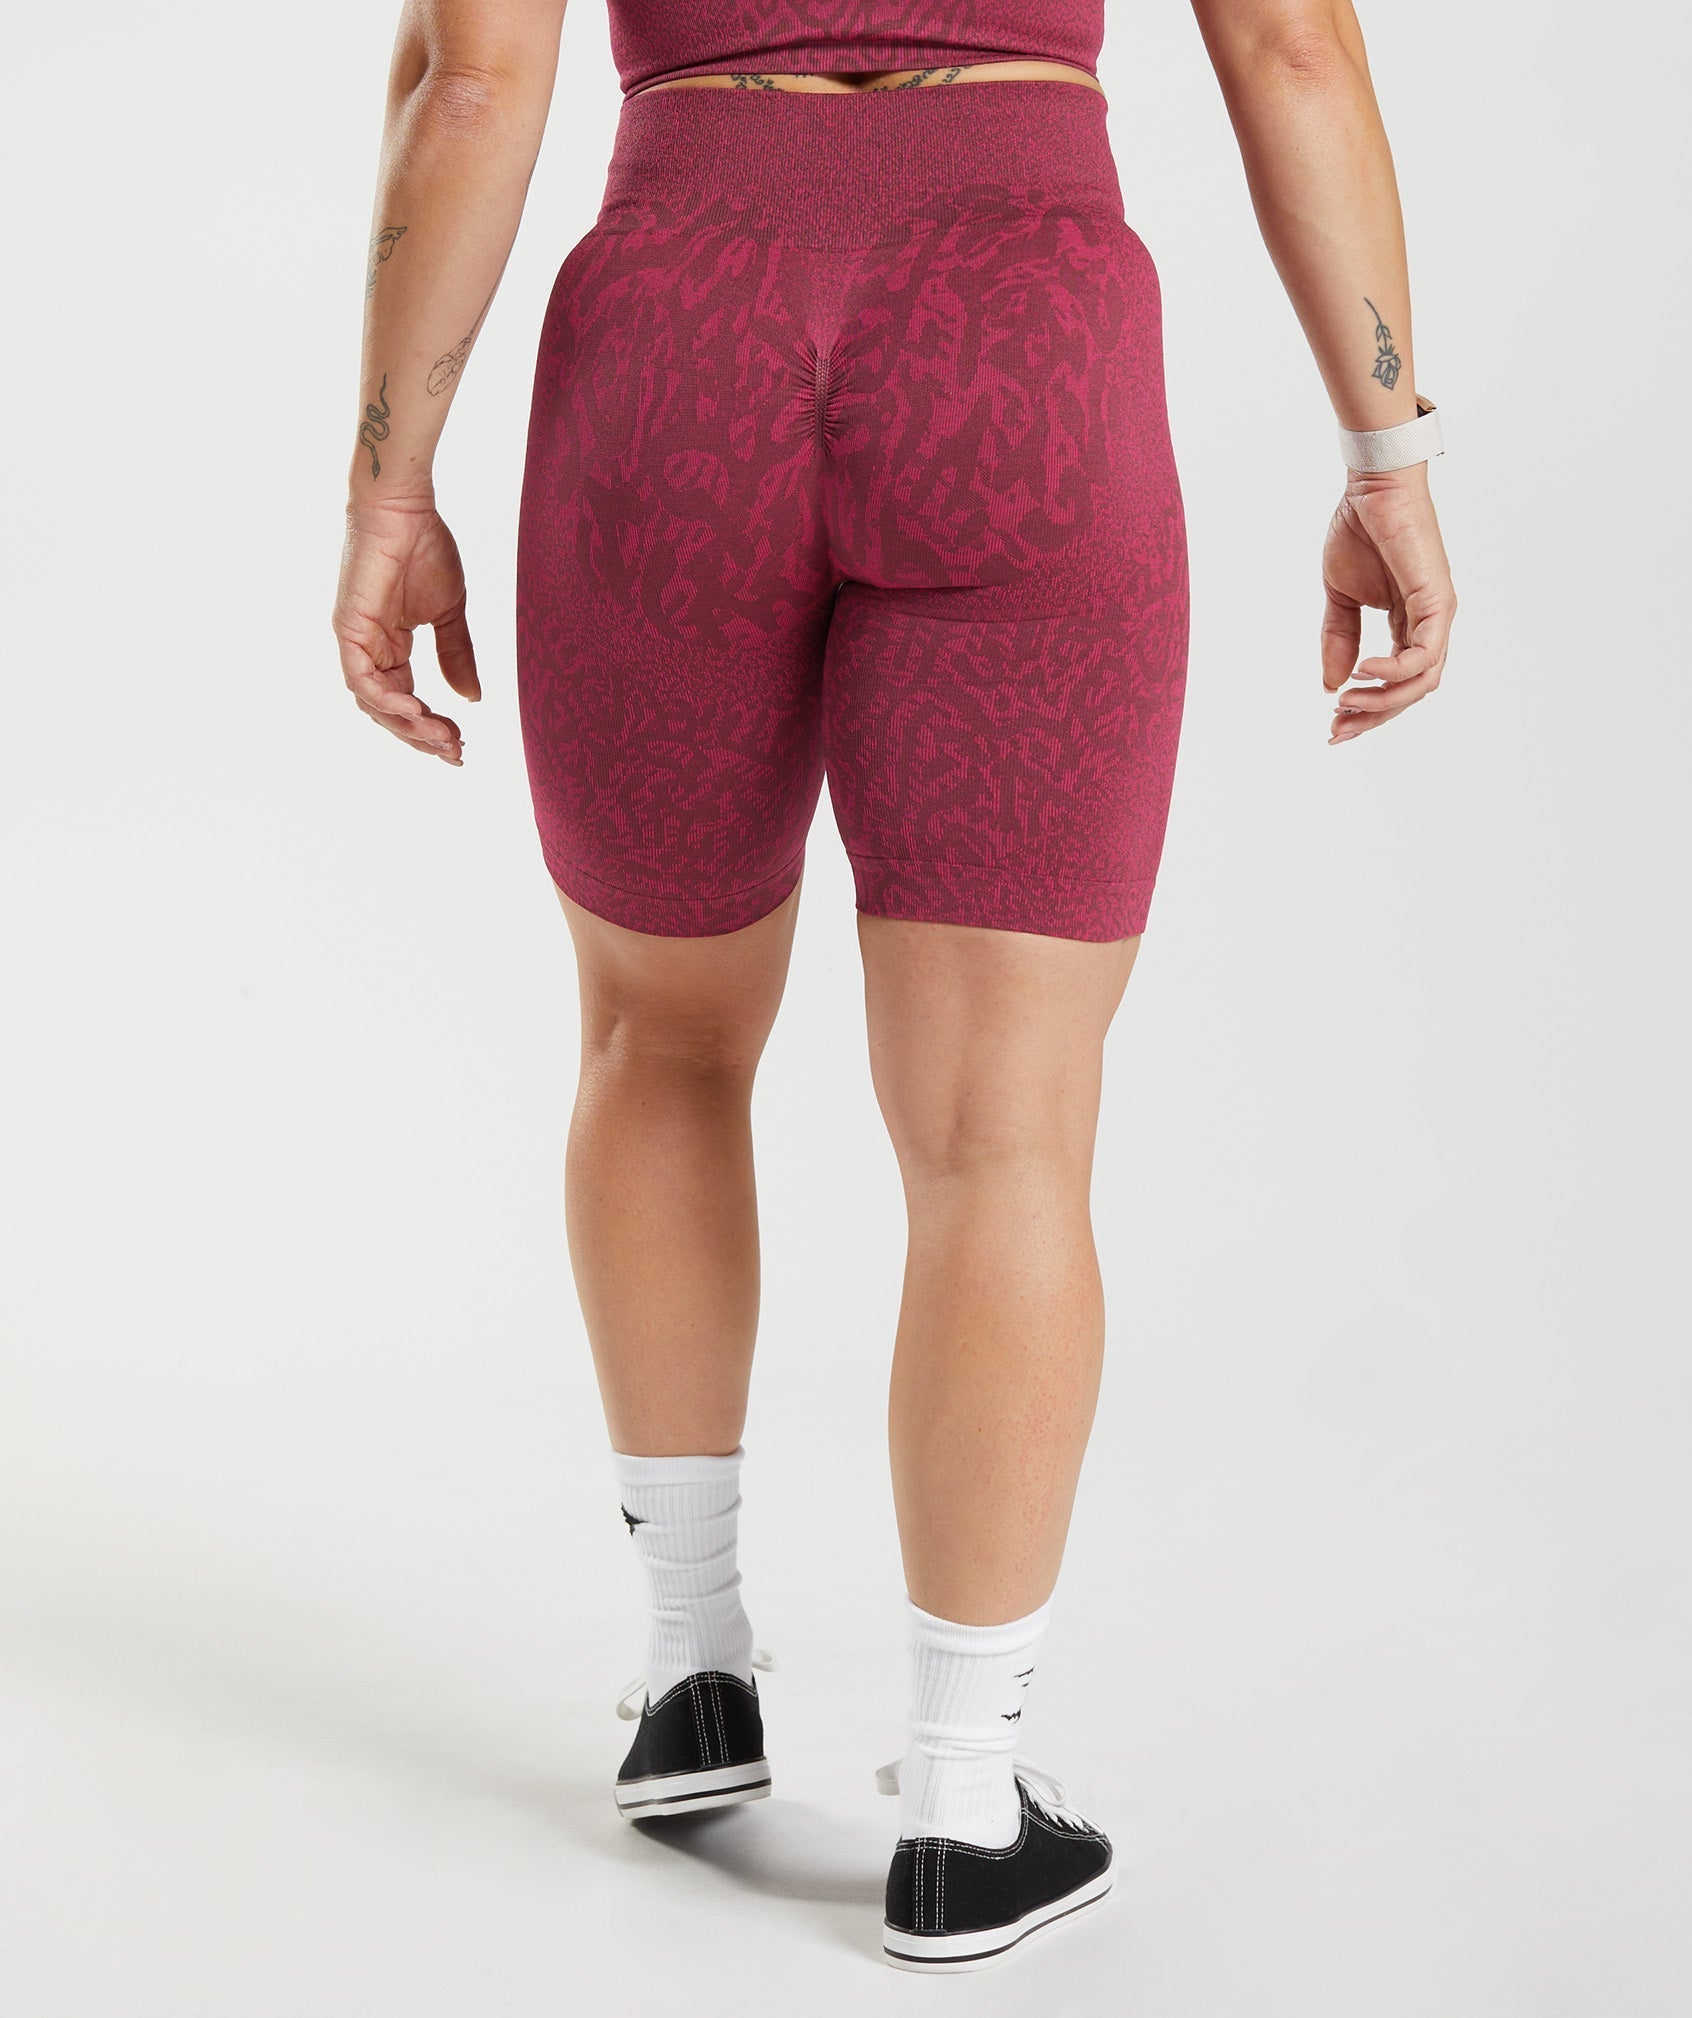 Adapt Animal Seamless Cycling Shorts in Reef | Cherry Brown - view 2